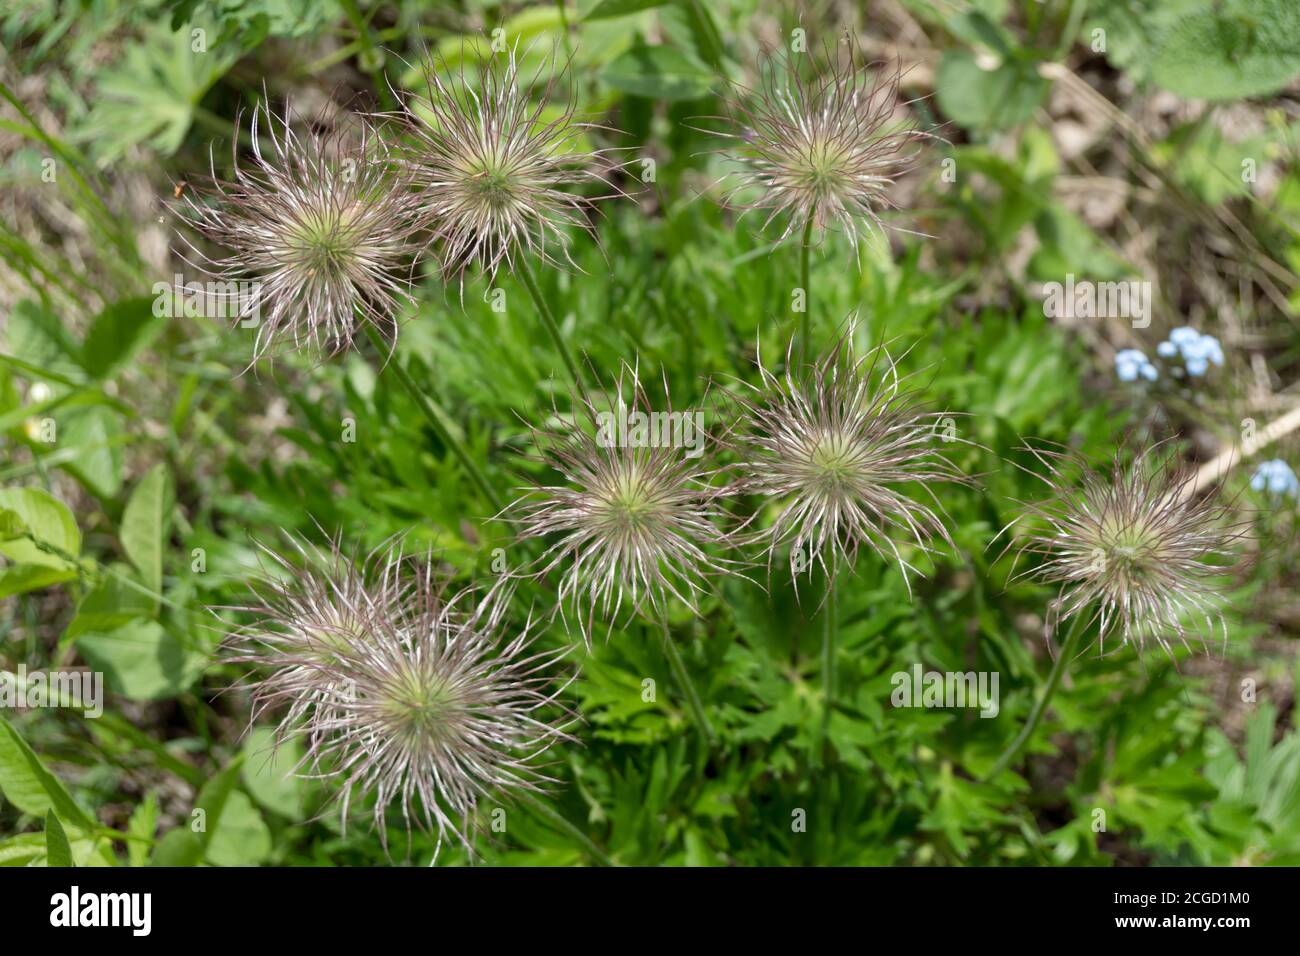 Top view of the faded fluffy inflorescence of Prairie smoke (lat. Pulsatílla pátens) or Spreading pasqueflower (lat. Anemone patents). Stock Photo